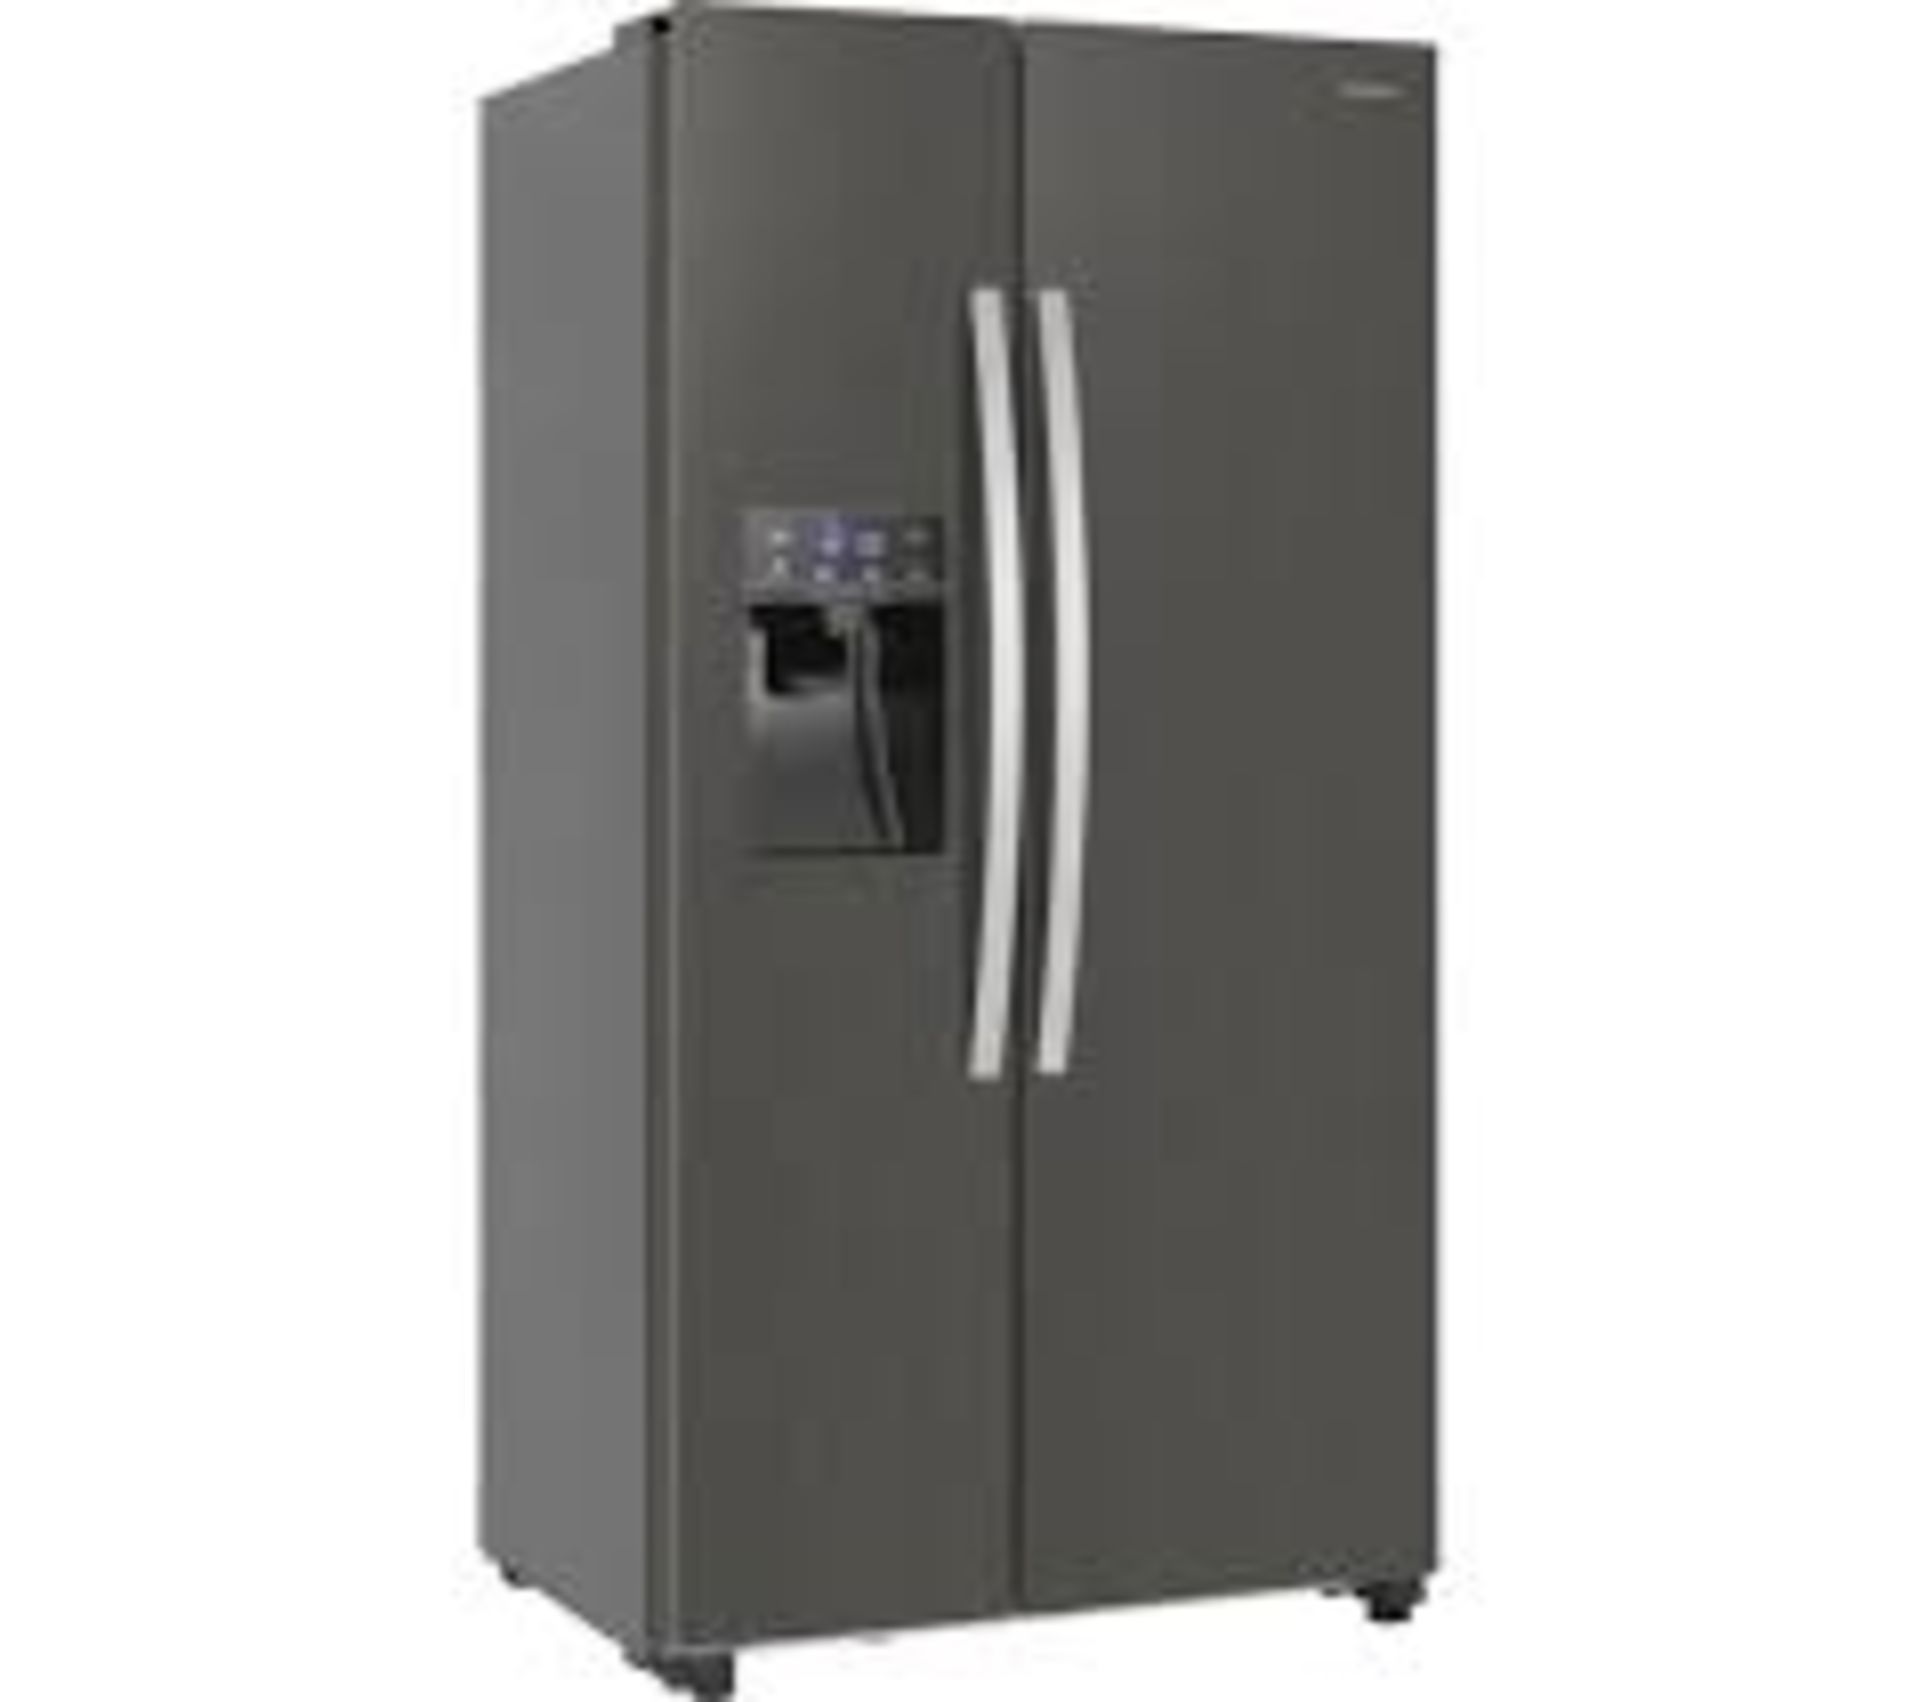 1 x Kenwood KSBSDiX20 Stainless Steel American Style Fridge Freezer With Water and Ice Dispenser - Image 5 of 8